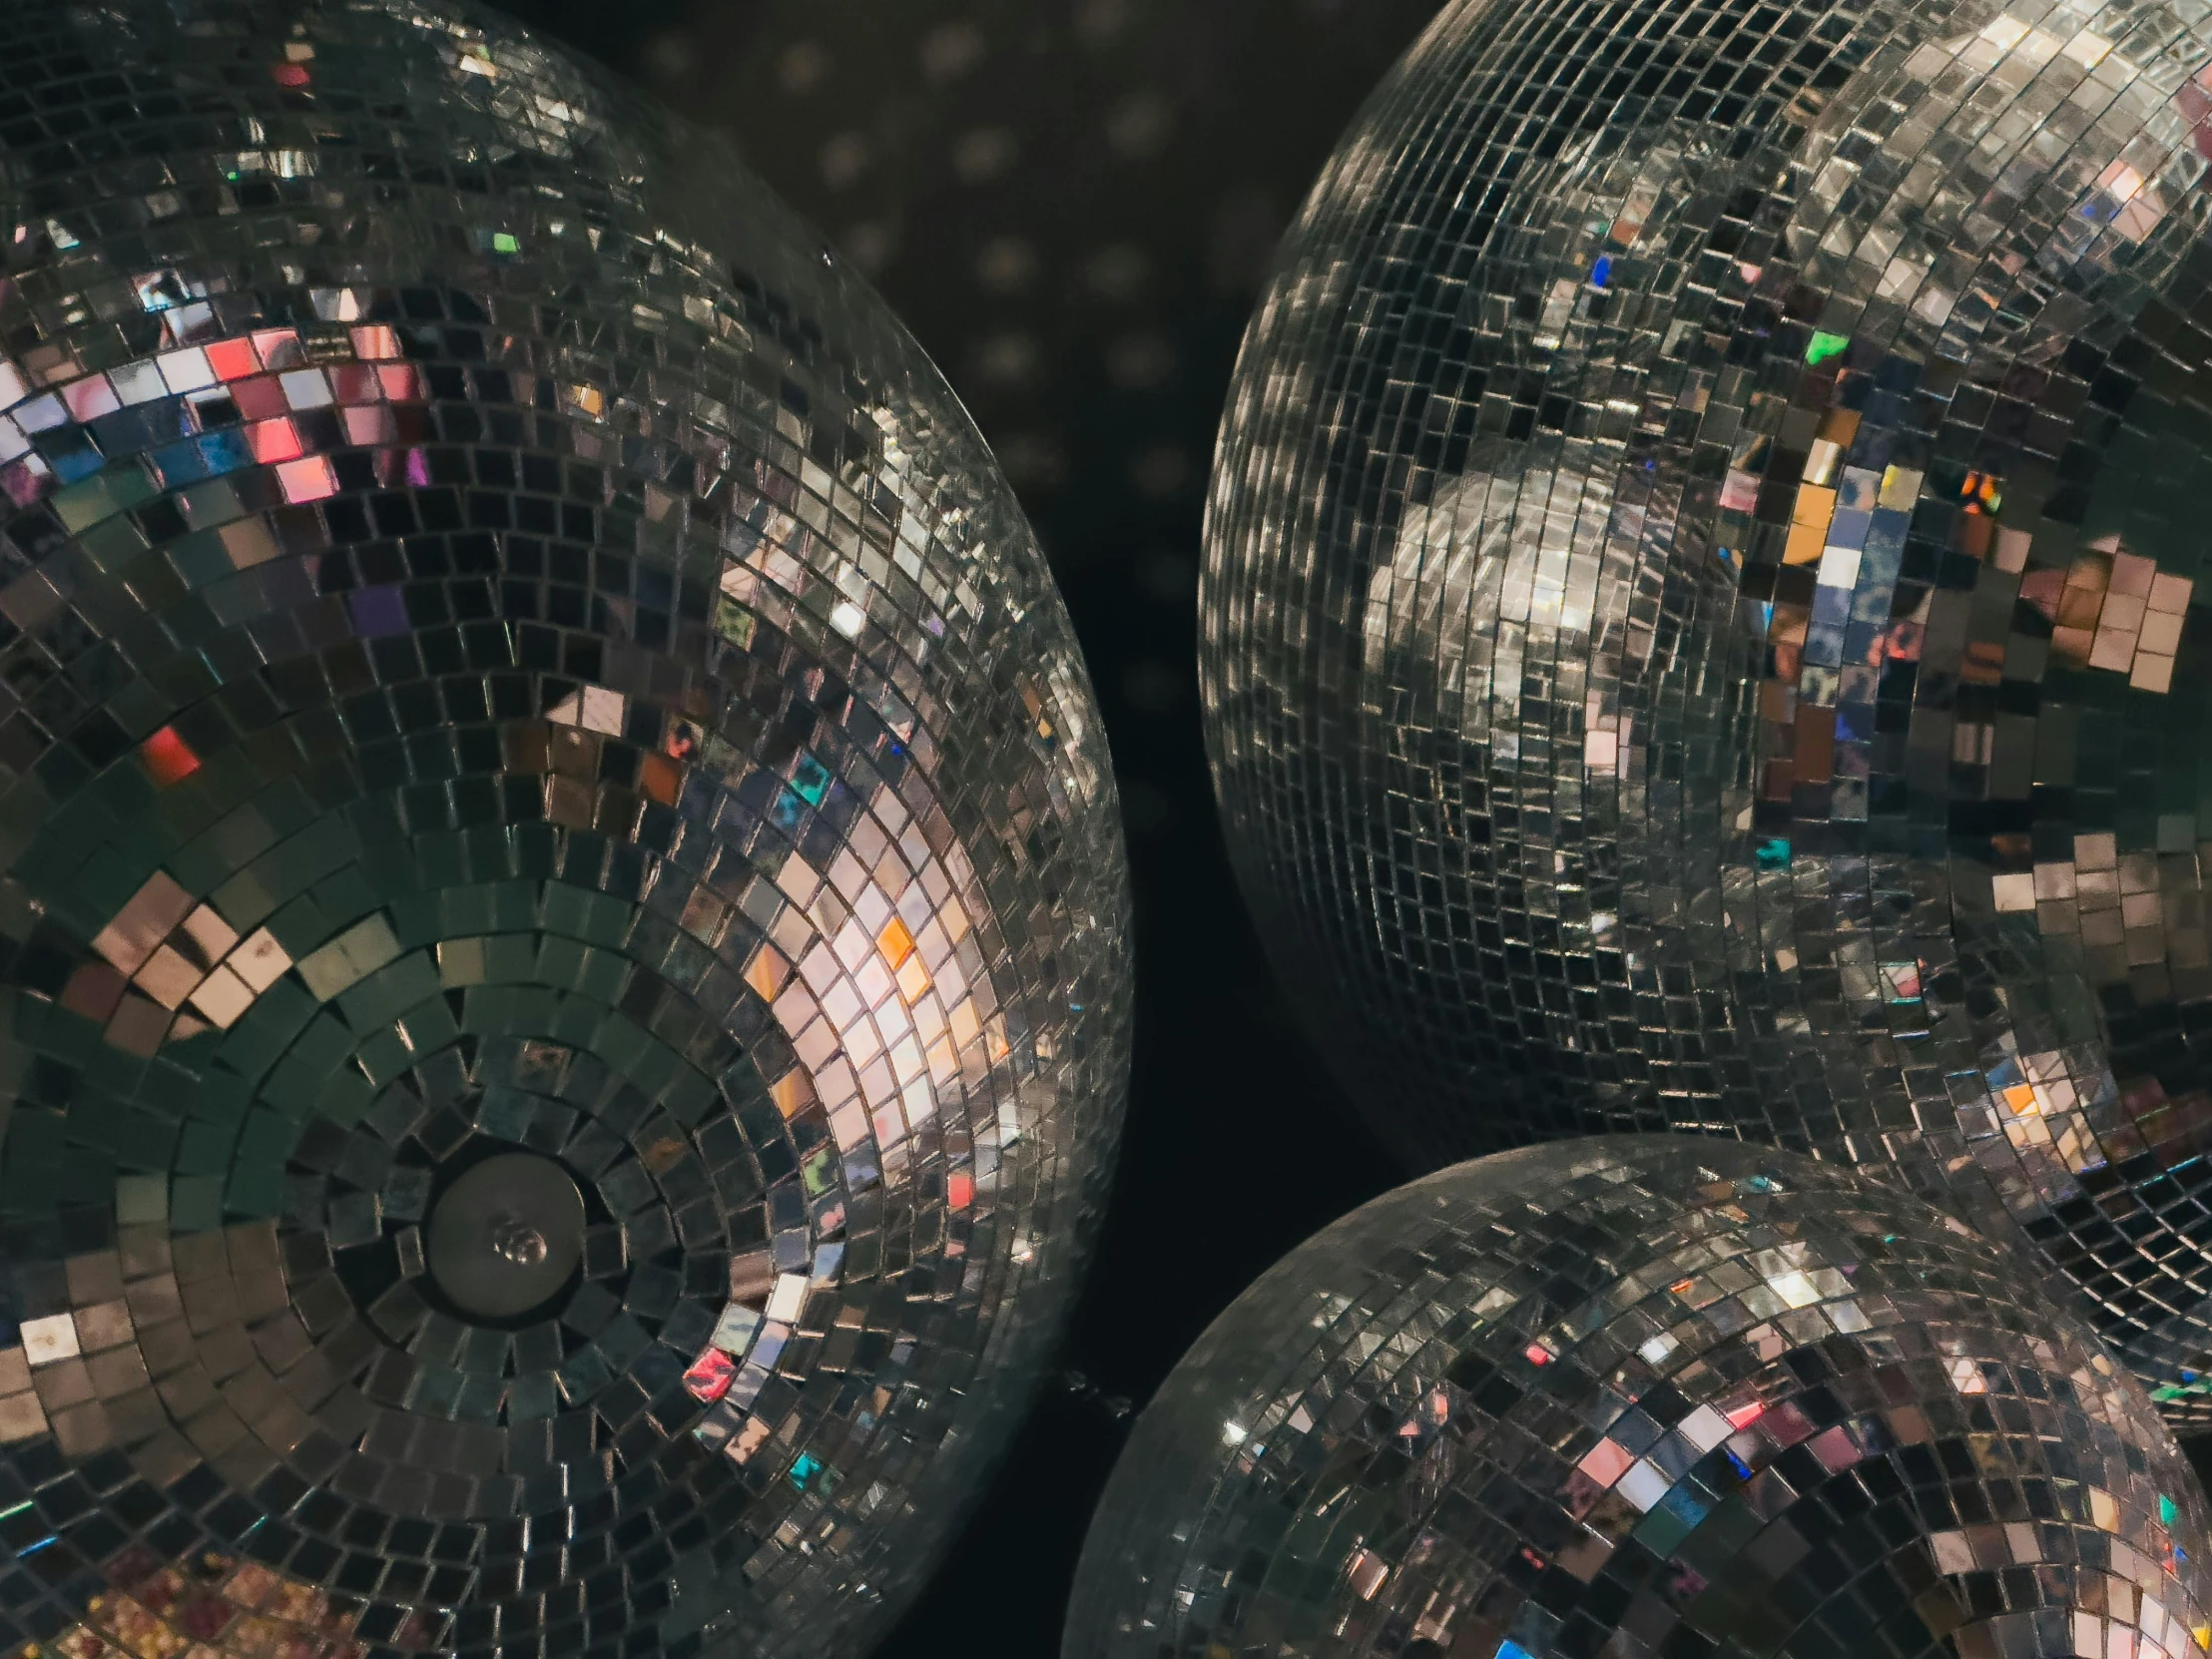 disco balls with mirrors in them all arranged